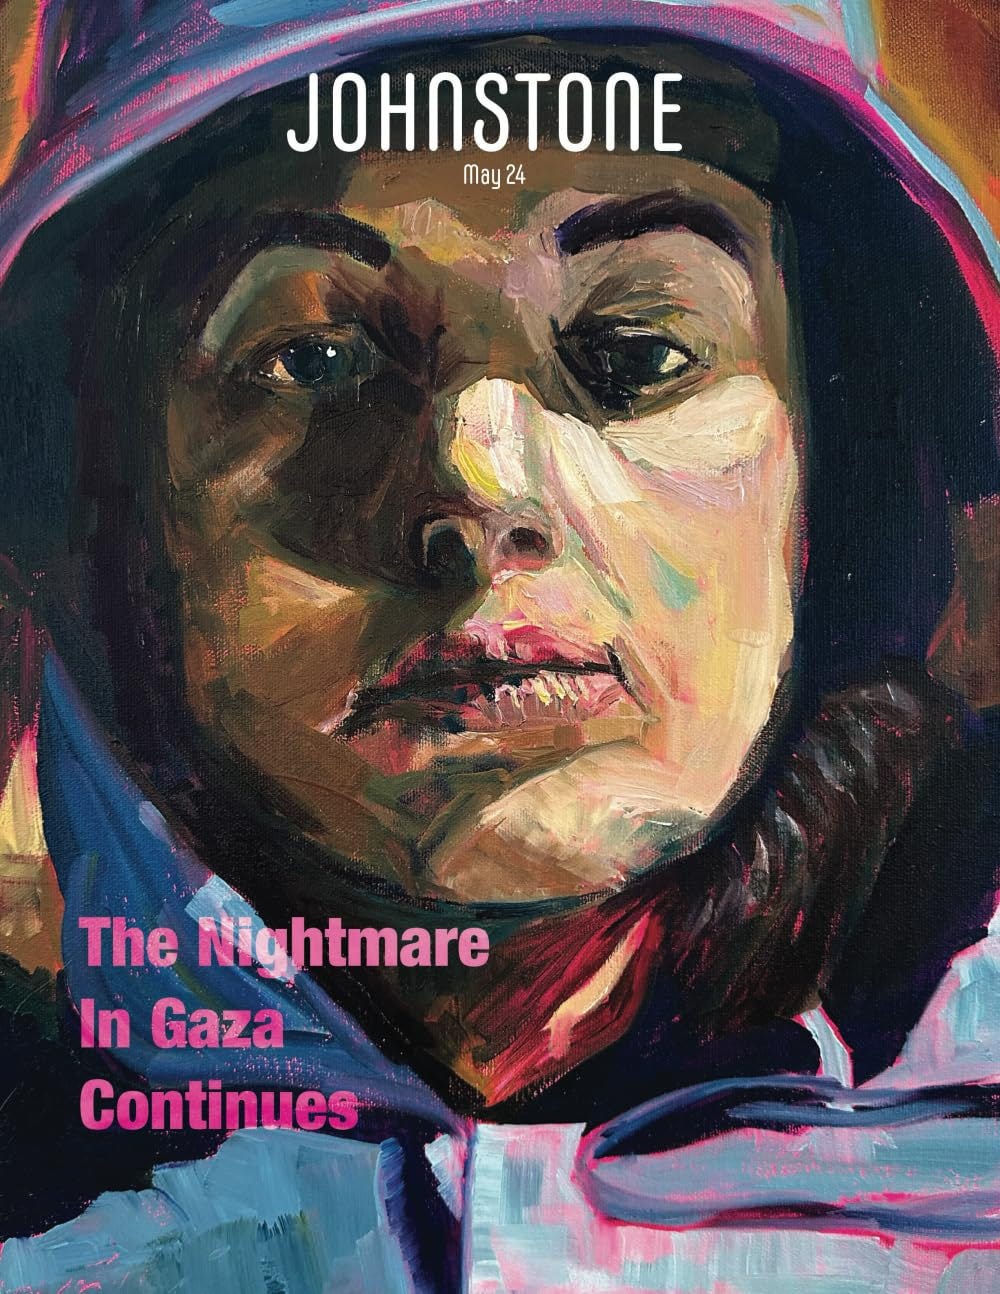 The New Issue Of JOHNSTONE: The Nightmare In Gaza Continues